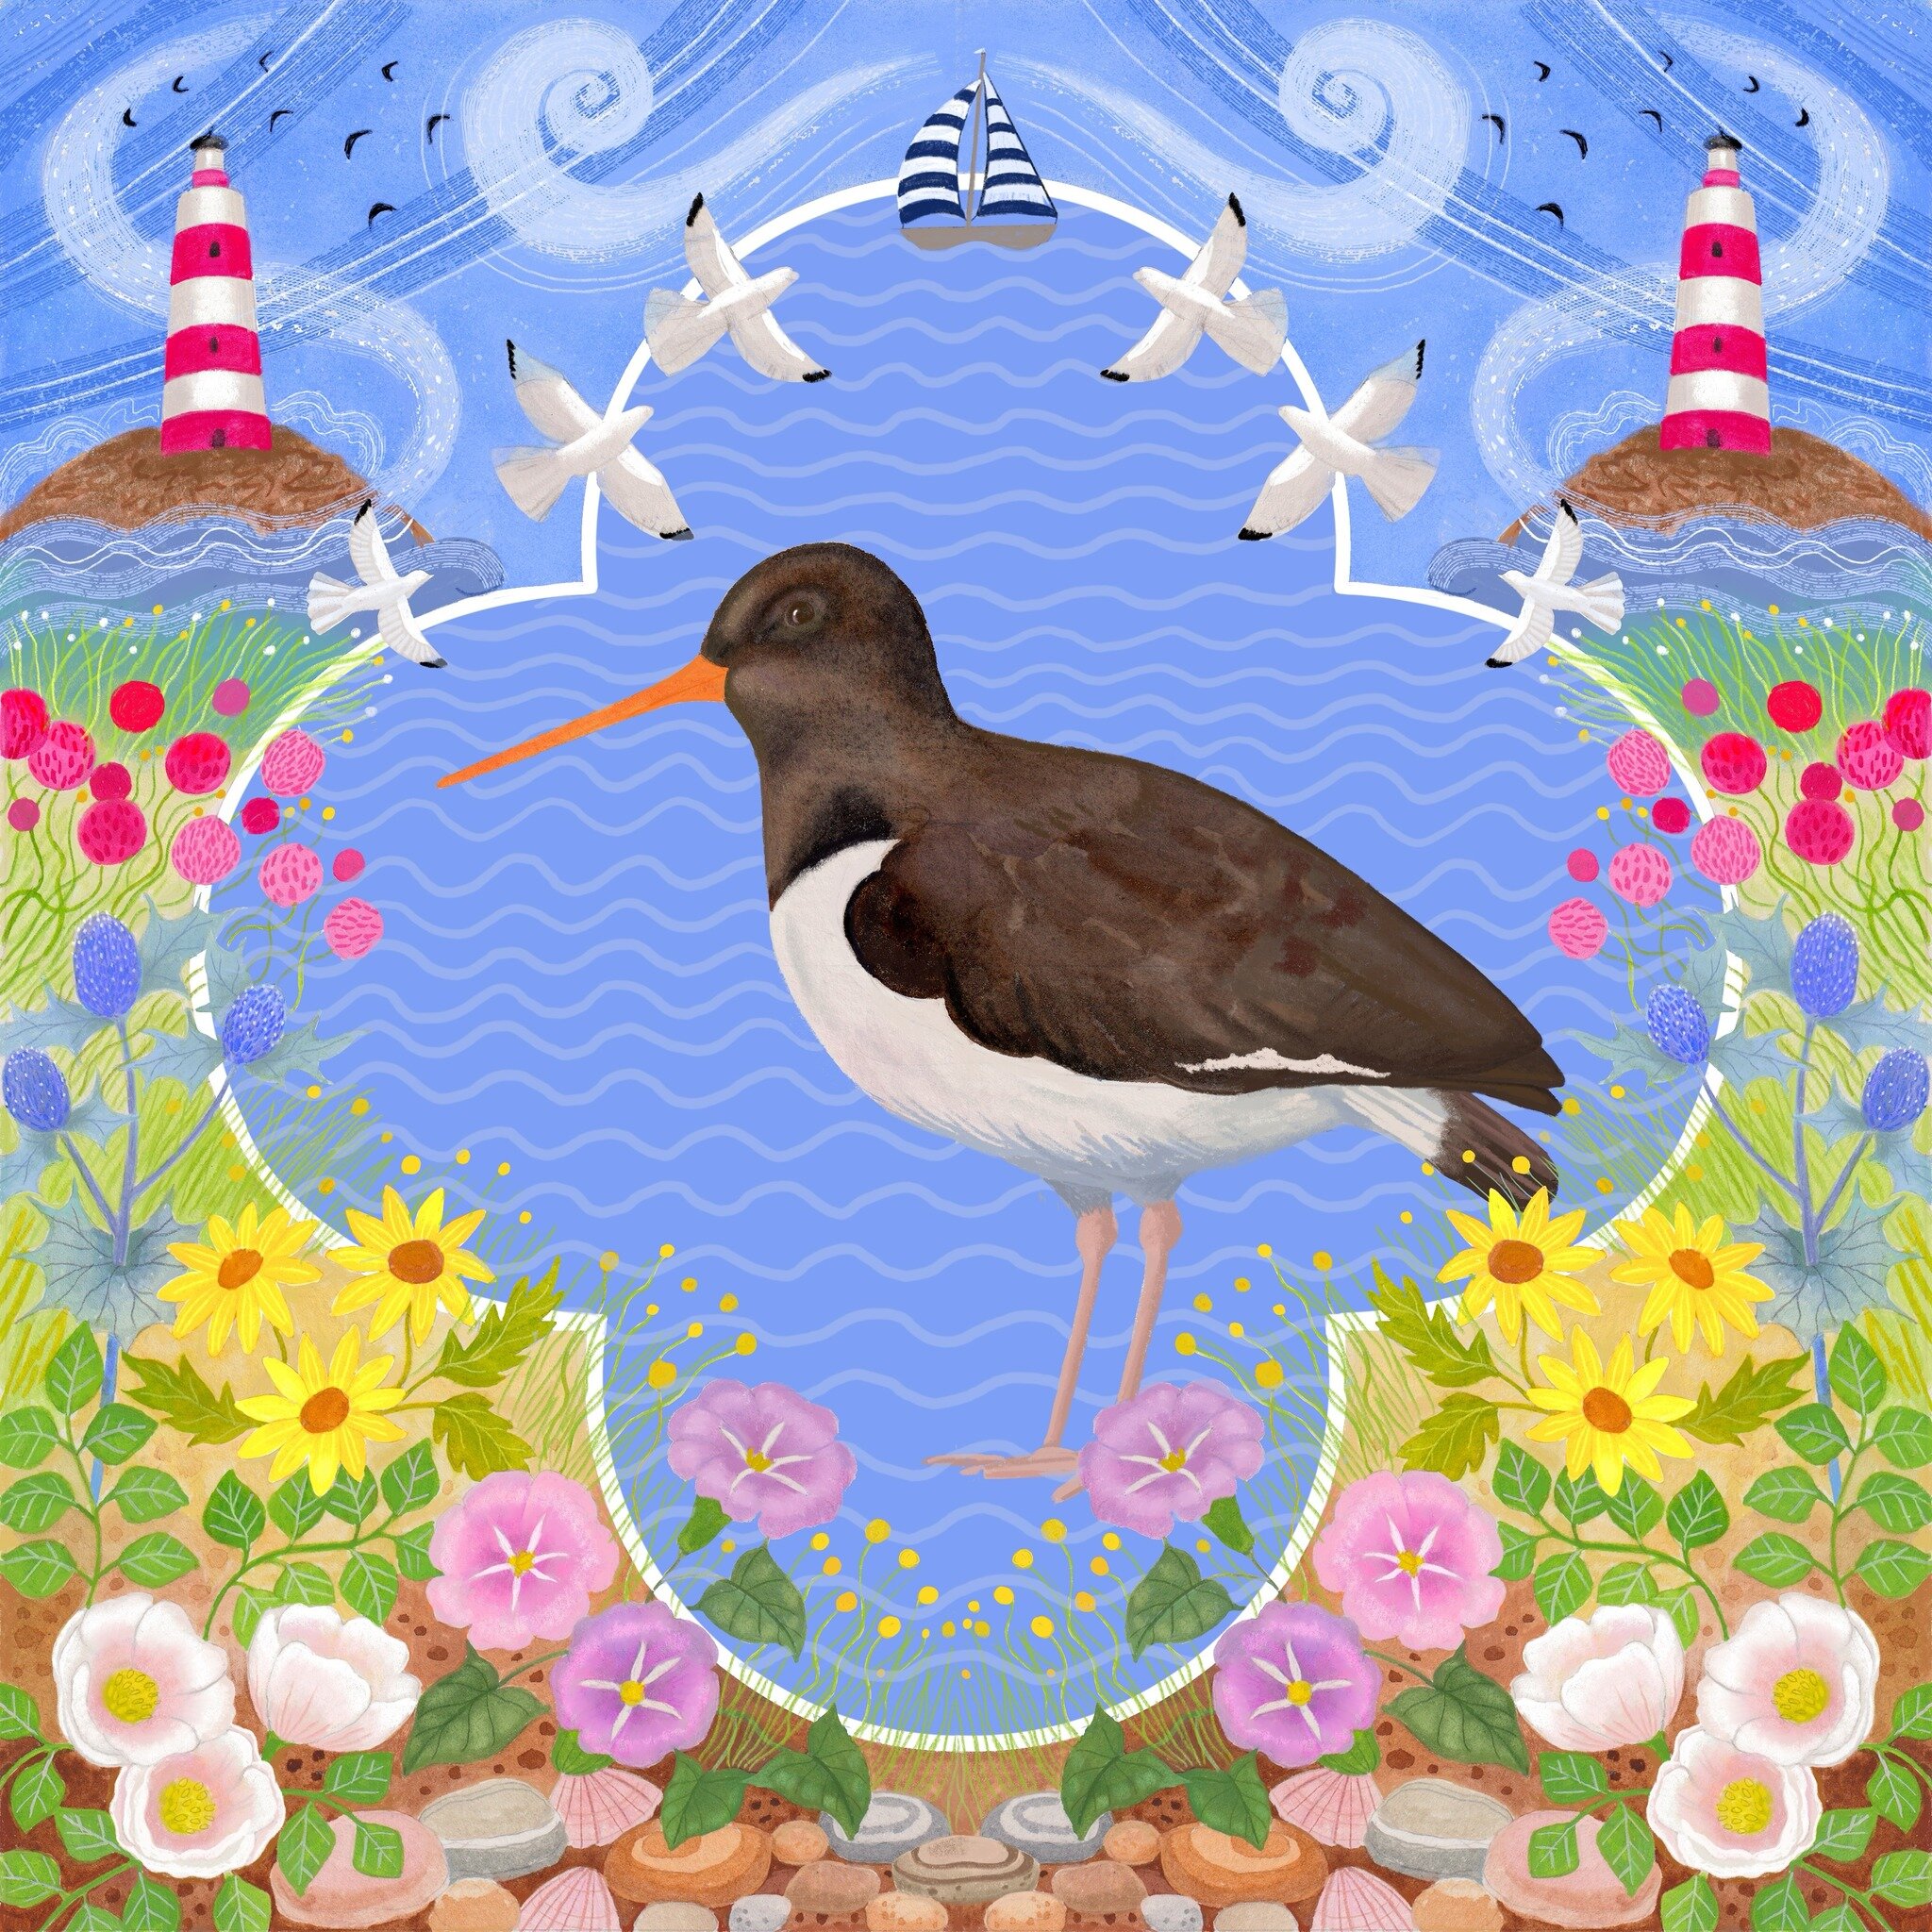 An Oyster Catcher illustration from last week and a reminder that sunny days are coming, I promise ! 🌞🌞🌞☔️

#illustration #illustrator #greetingcard #artlicensing #jigsawpuzzles #oystercatcher #wildlifeart #birdillustration #britishwildlife